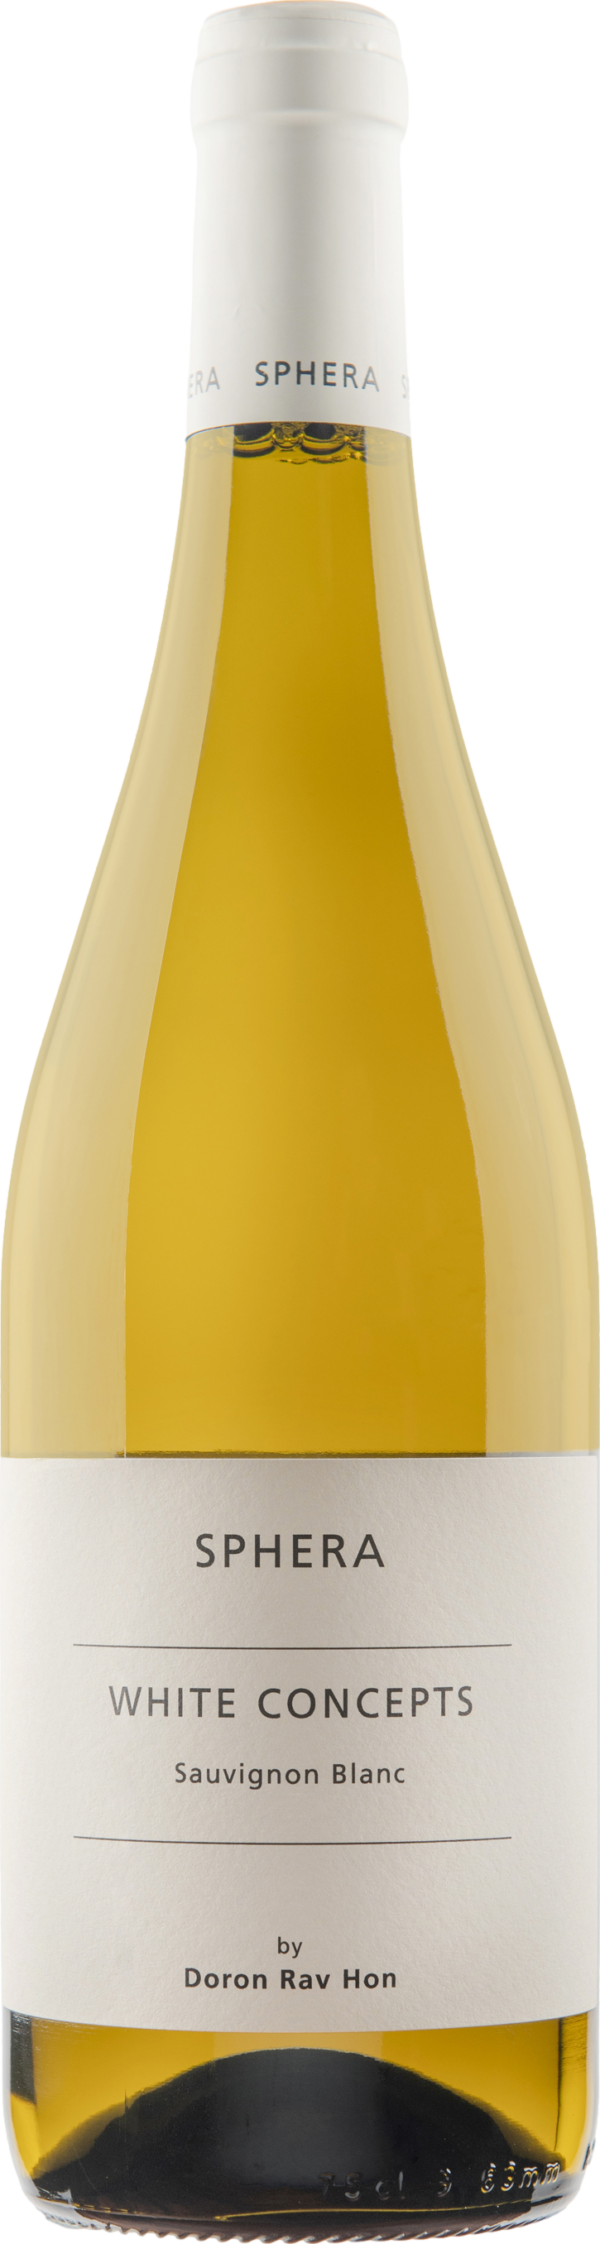 Product image of Sphera White Concepts Sauvignon Blanc 2022 from 8wines